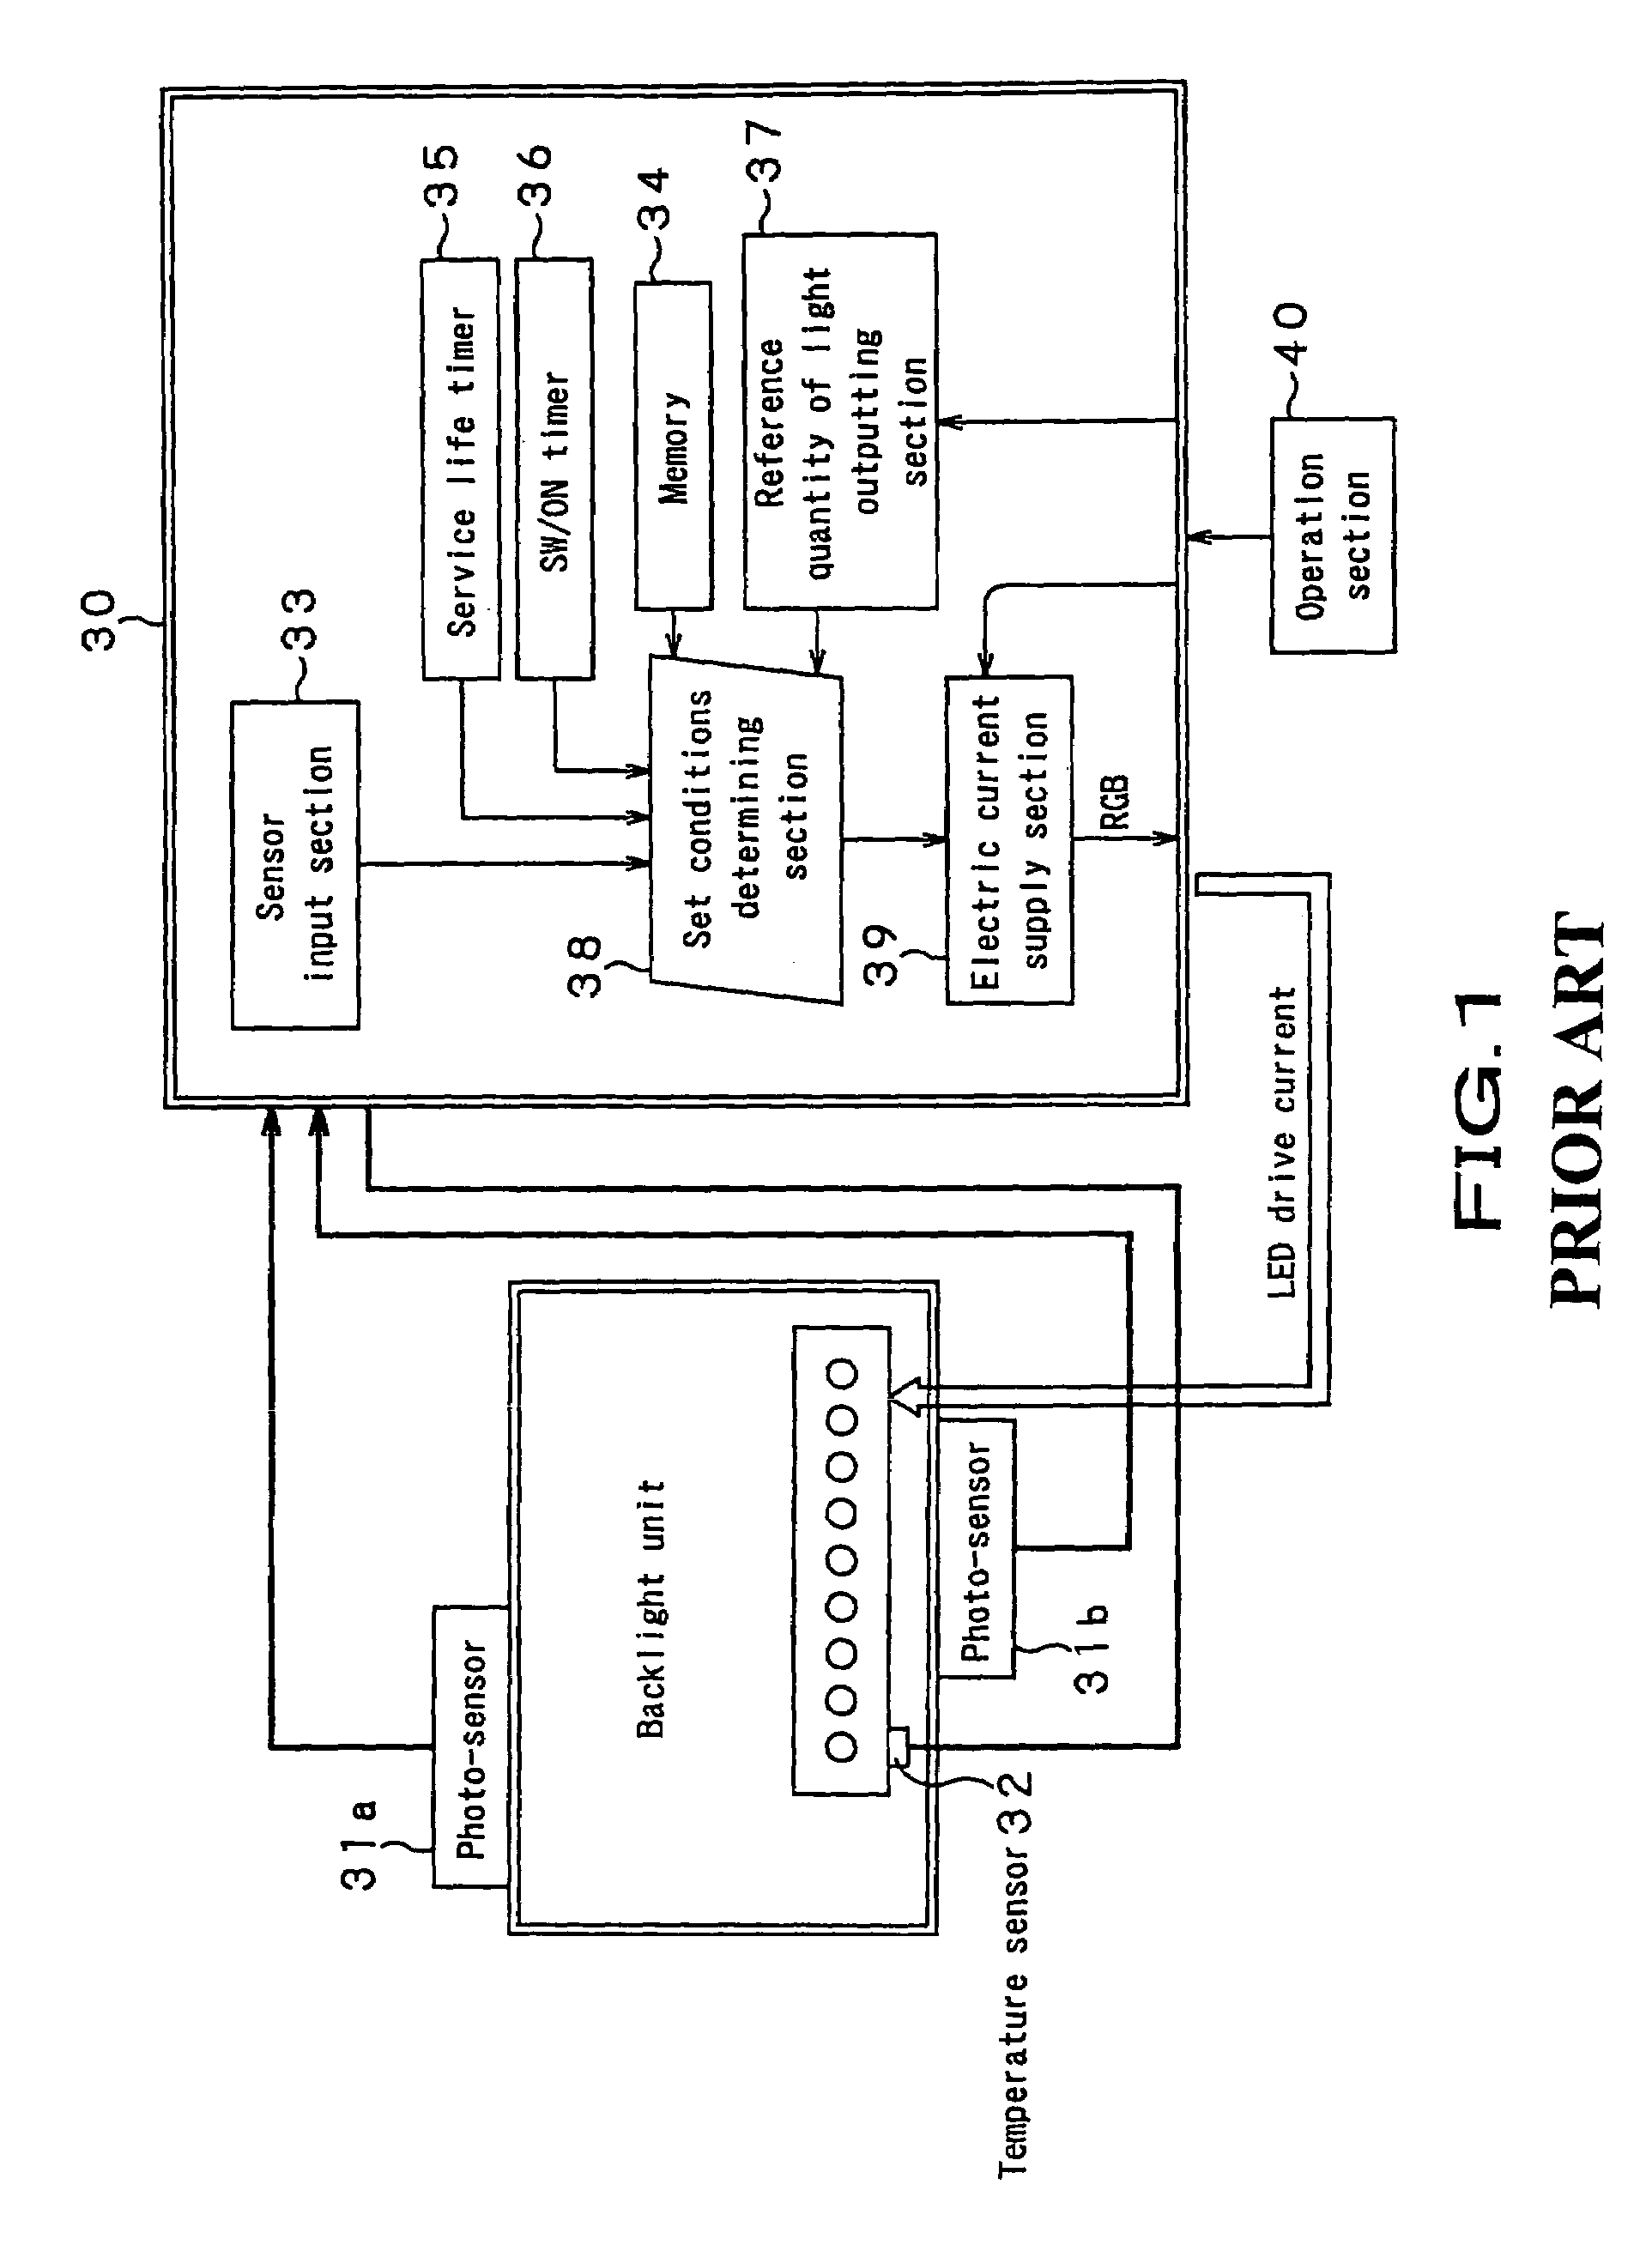 Device for controlling light emission rates of a backlight